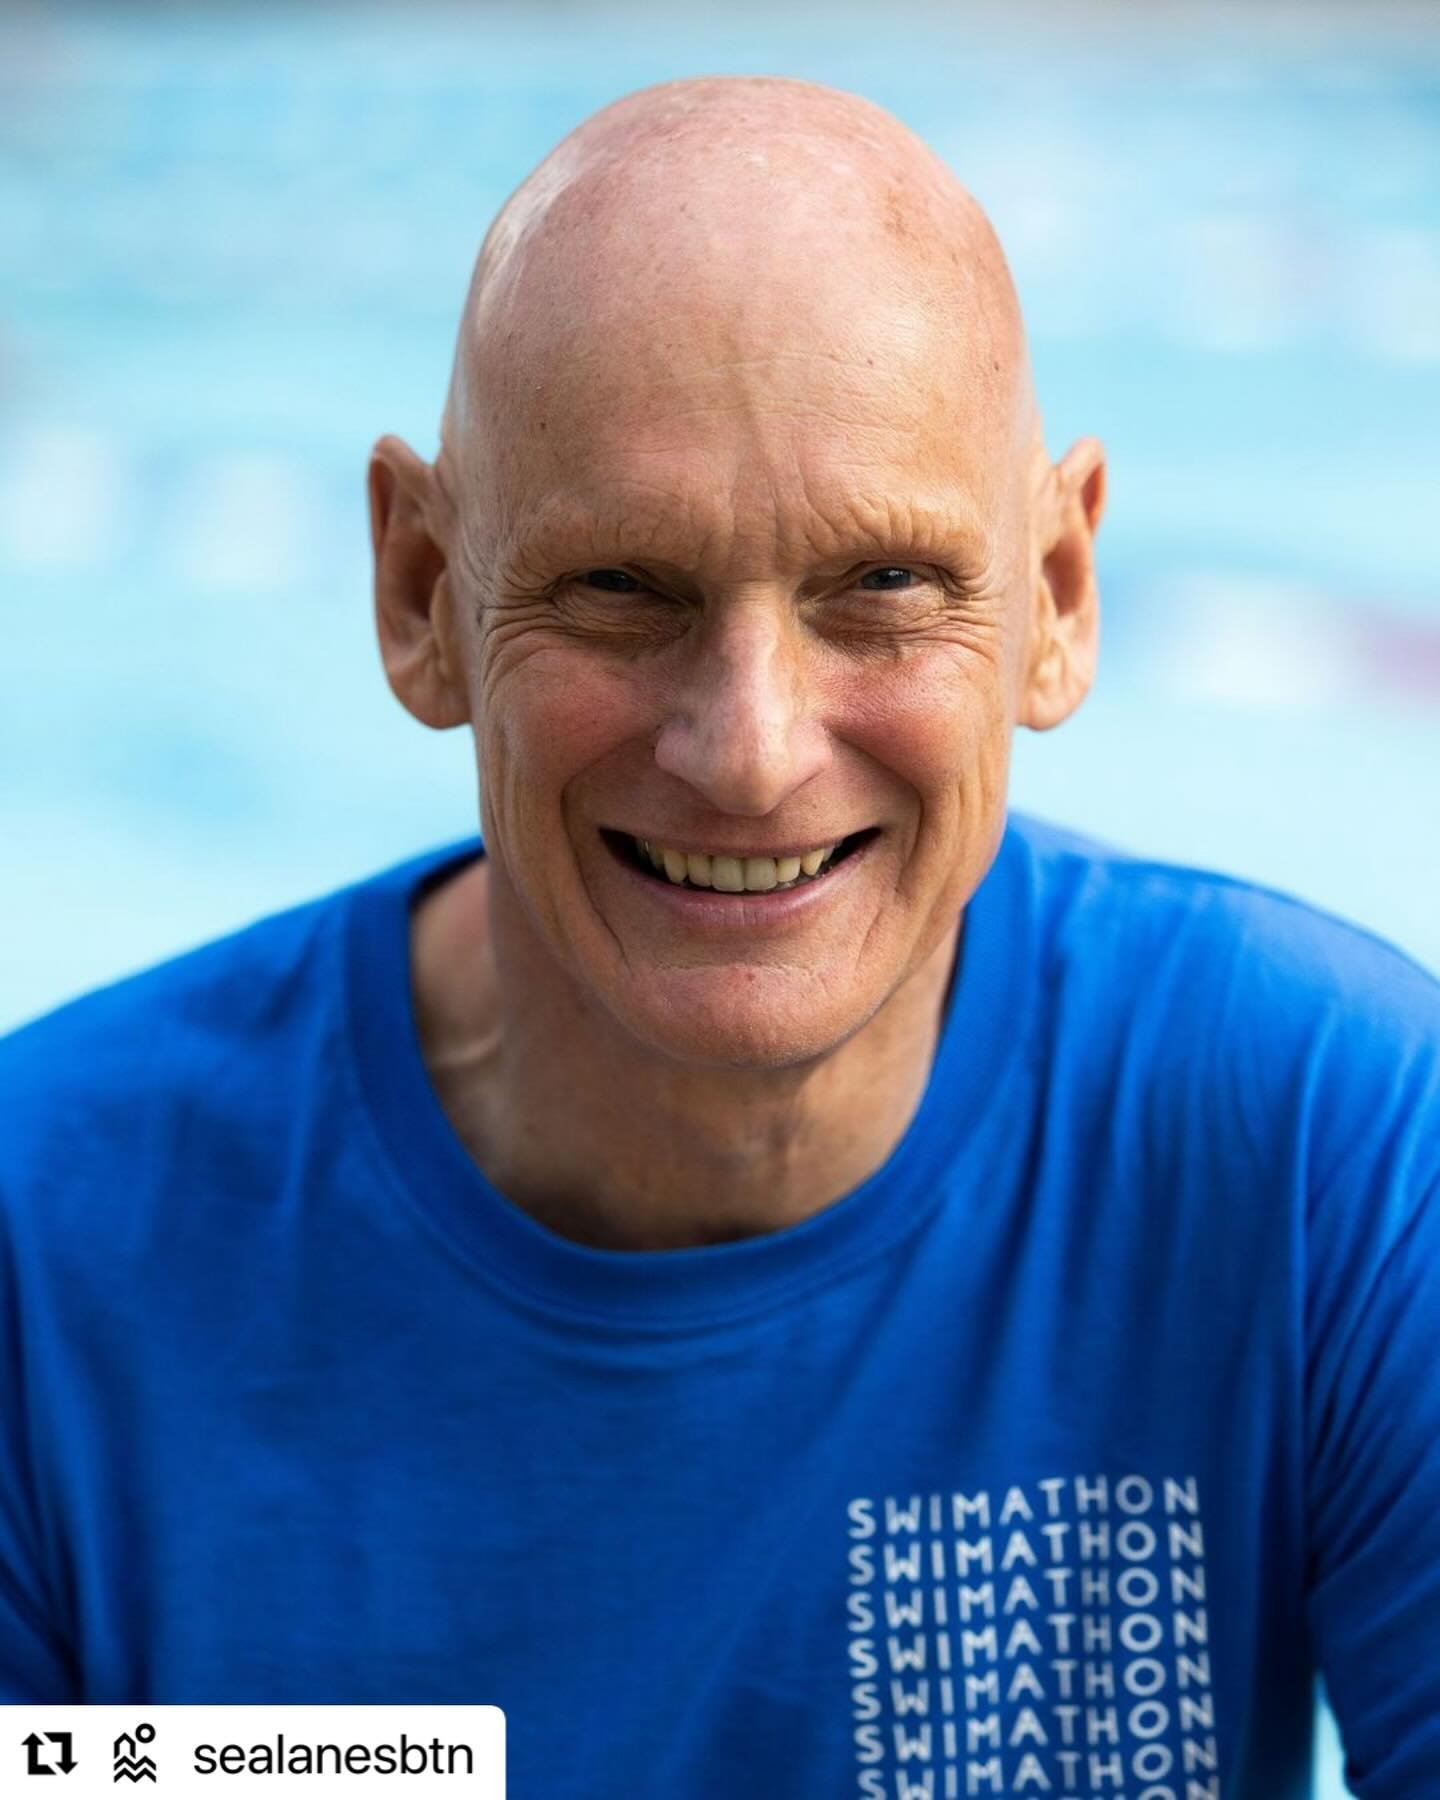 #Repost @sealanesbtn 
・・・
Exciting news 👏 🏊&zwj;♂️
We&rsquo;re thrilled to announce that Duncan Goodhew, former Olympic swimmer and Swimathon President, will be joining us at Sea Lanes on Friday 26th April at 10am to launch @swimathon_uk 2024. Don&